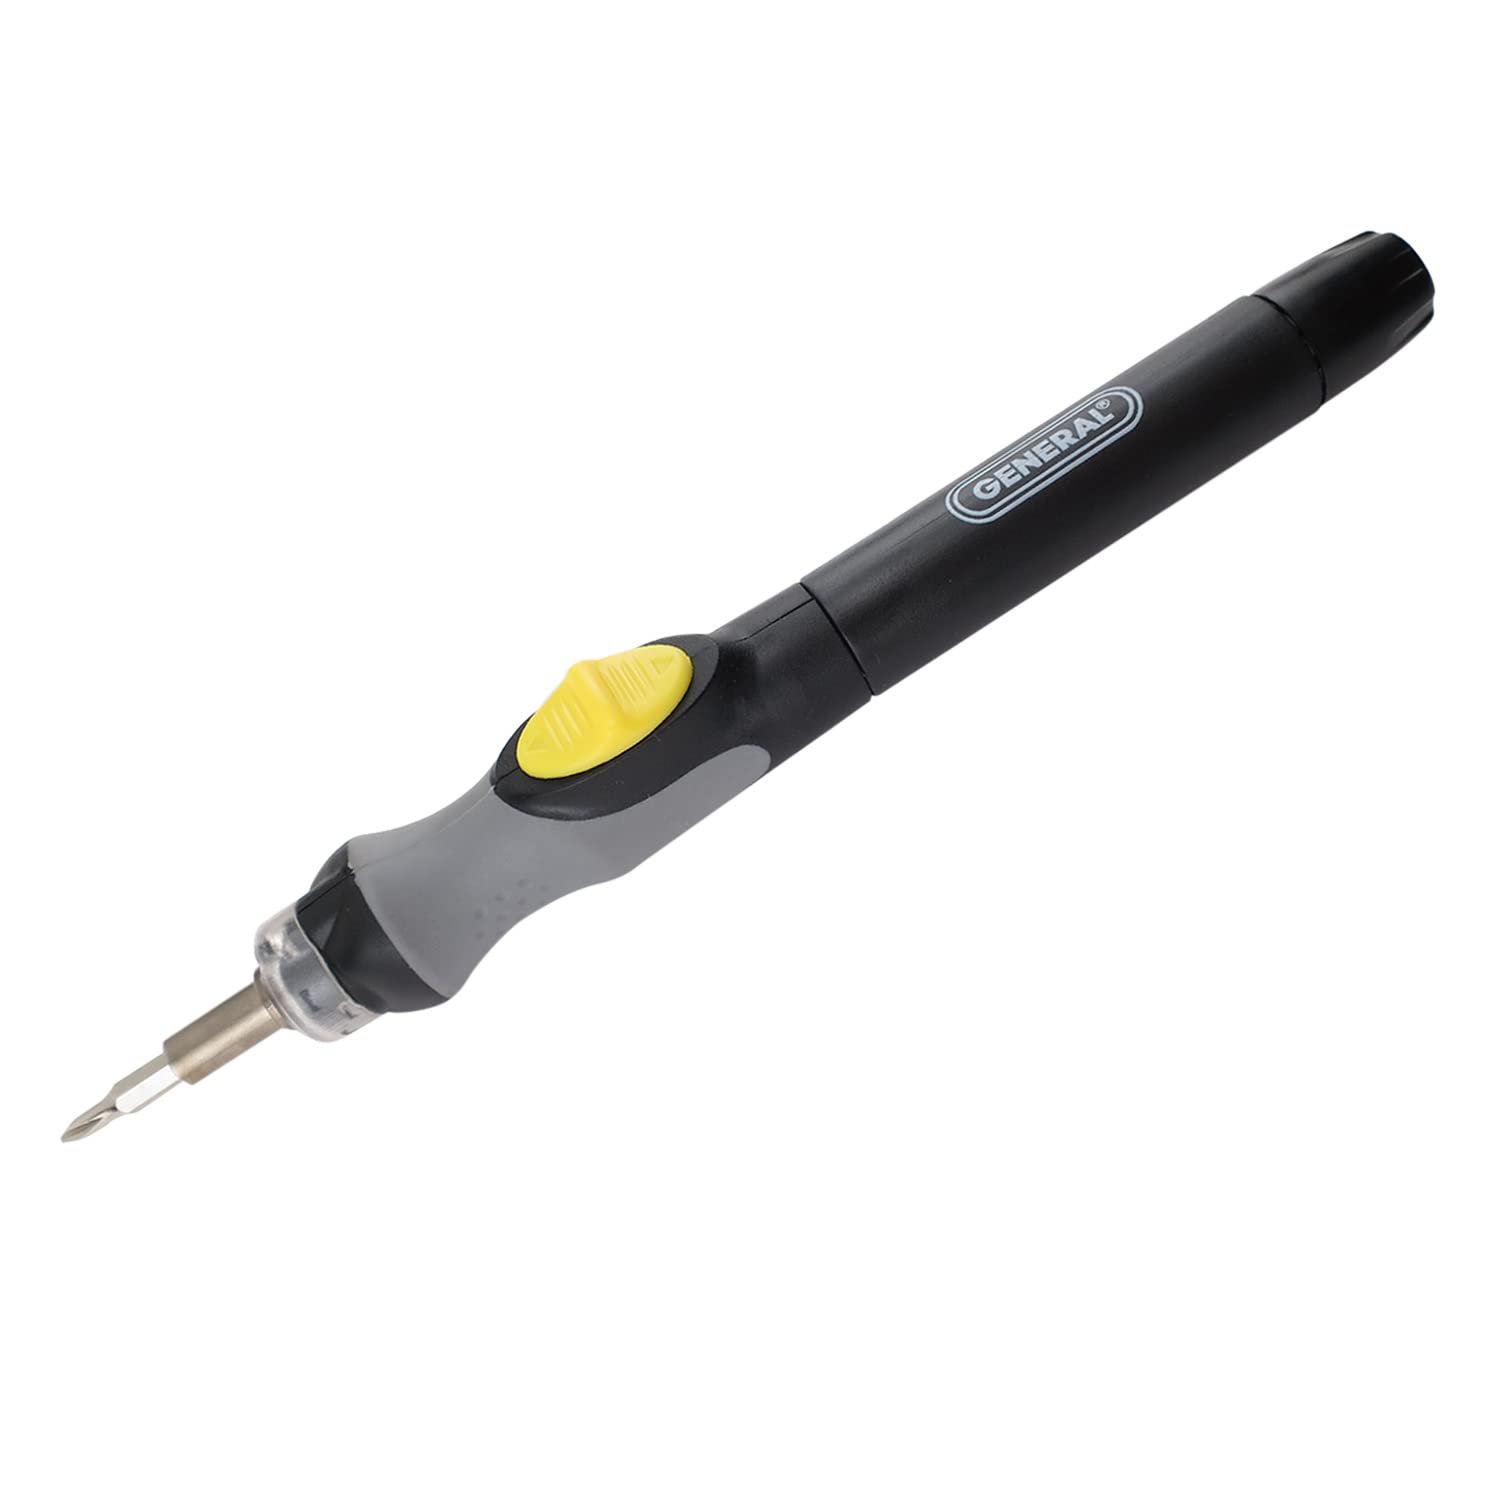 General Tools Cordless Lighted Power Precision Screwdriver #502 - Super-Torque Drive for Electronics, and DIY Crafts